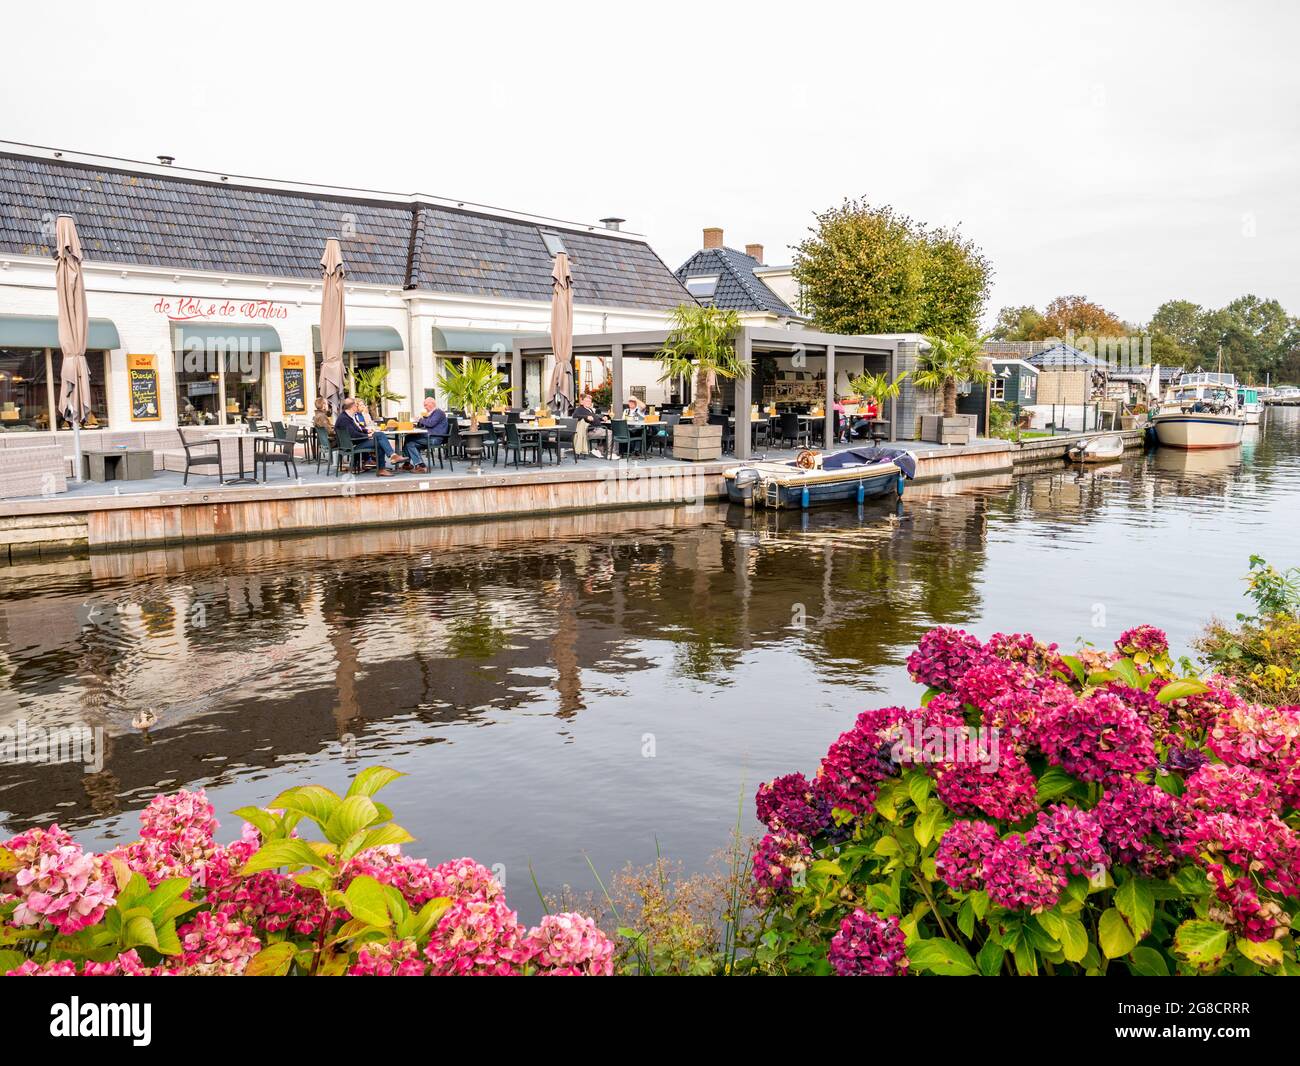 People on outdoor terrace of cafe restaurant by canal in old village of Wartena, Leeuwarden, Netherlands Stock Photo